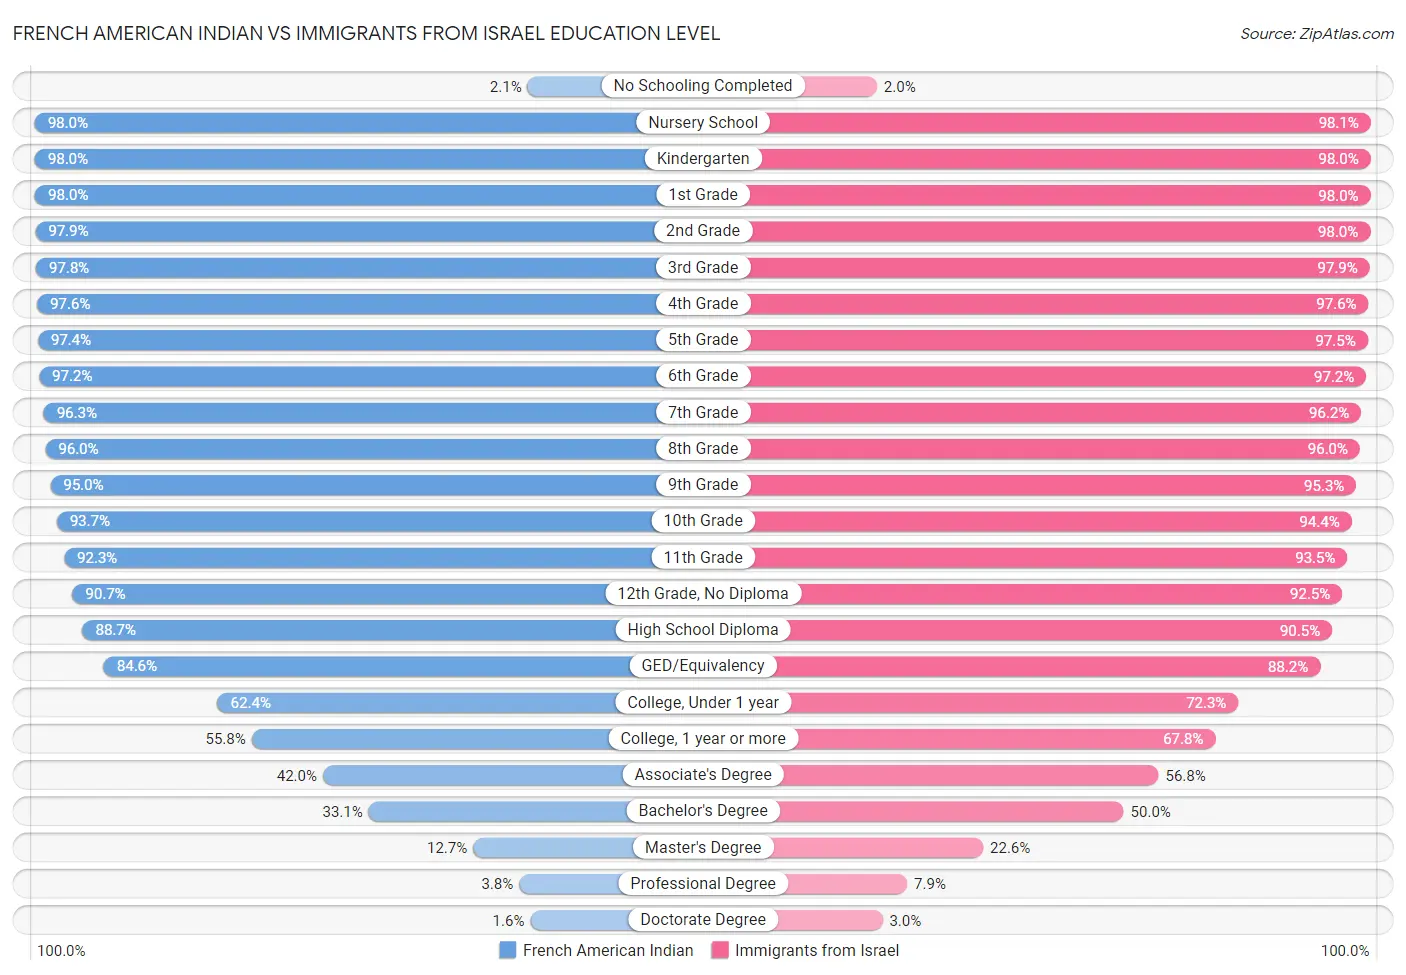 French American Indian vs Immigrants from Israel Education Level